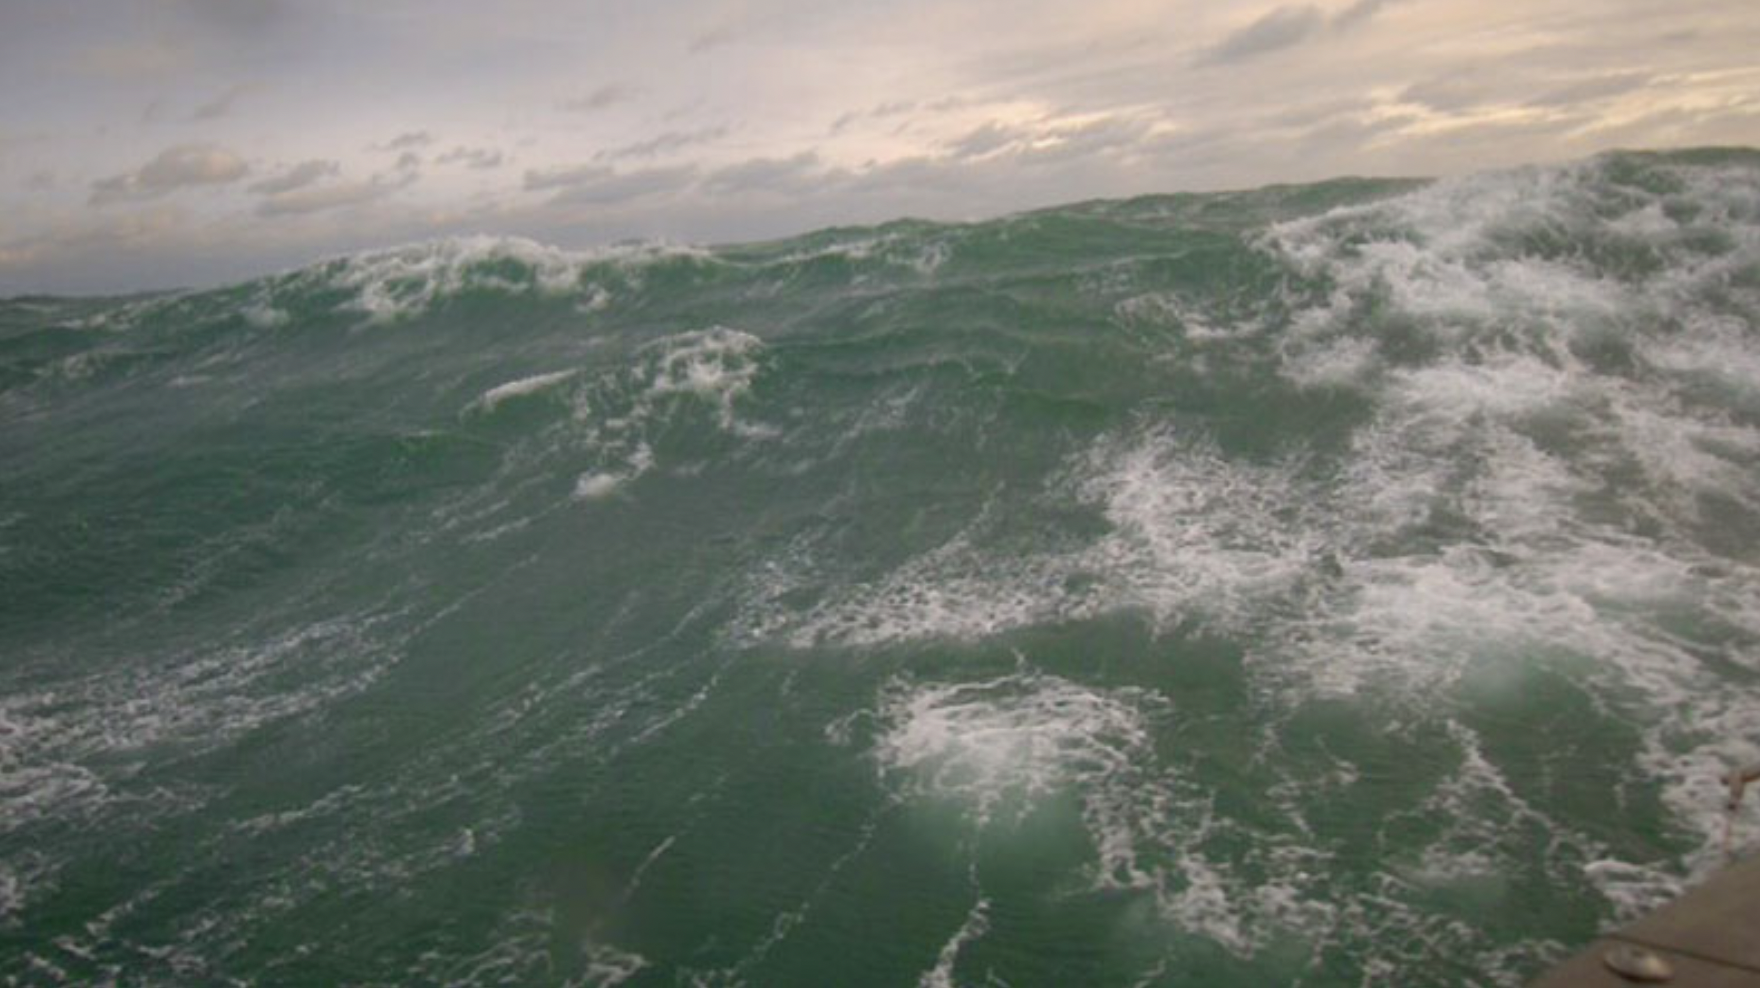 SD 1040 captured this photo of a wall of water in strong winds and waves on the edge of Tropical Storm Wanda (after the storm had weakened to a post-tropical low) on November 7, 2021, off the coast of Delaware as it made its way to Newport, Rhode Island, for retrieval. (Photo: Saildrone)